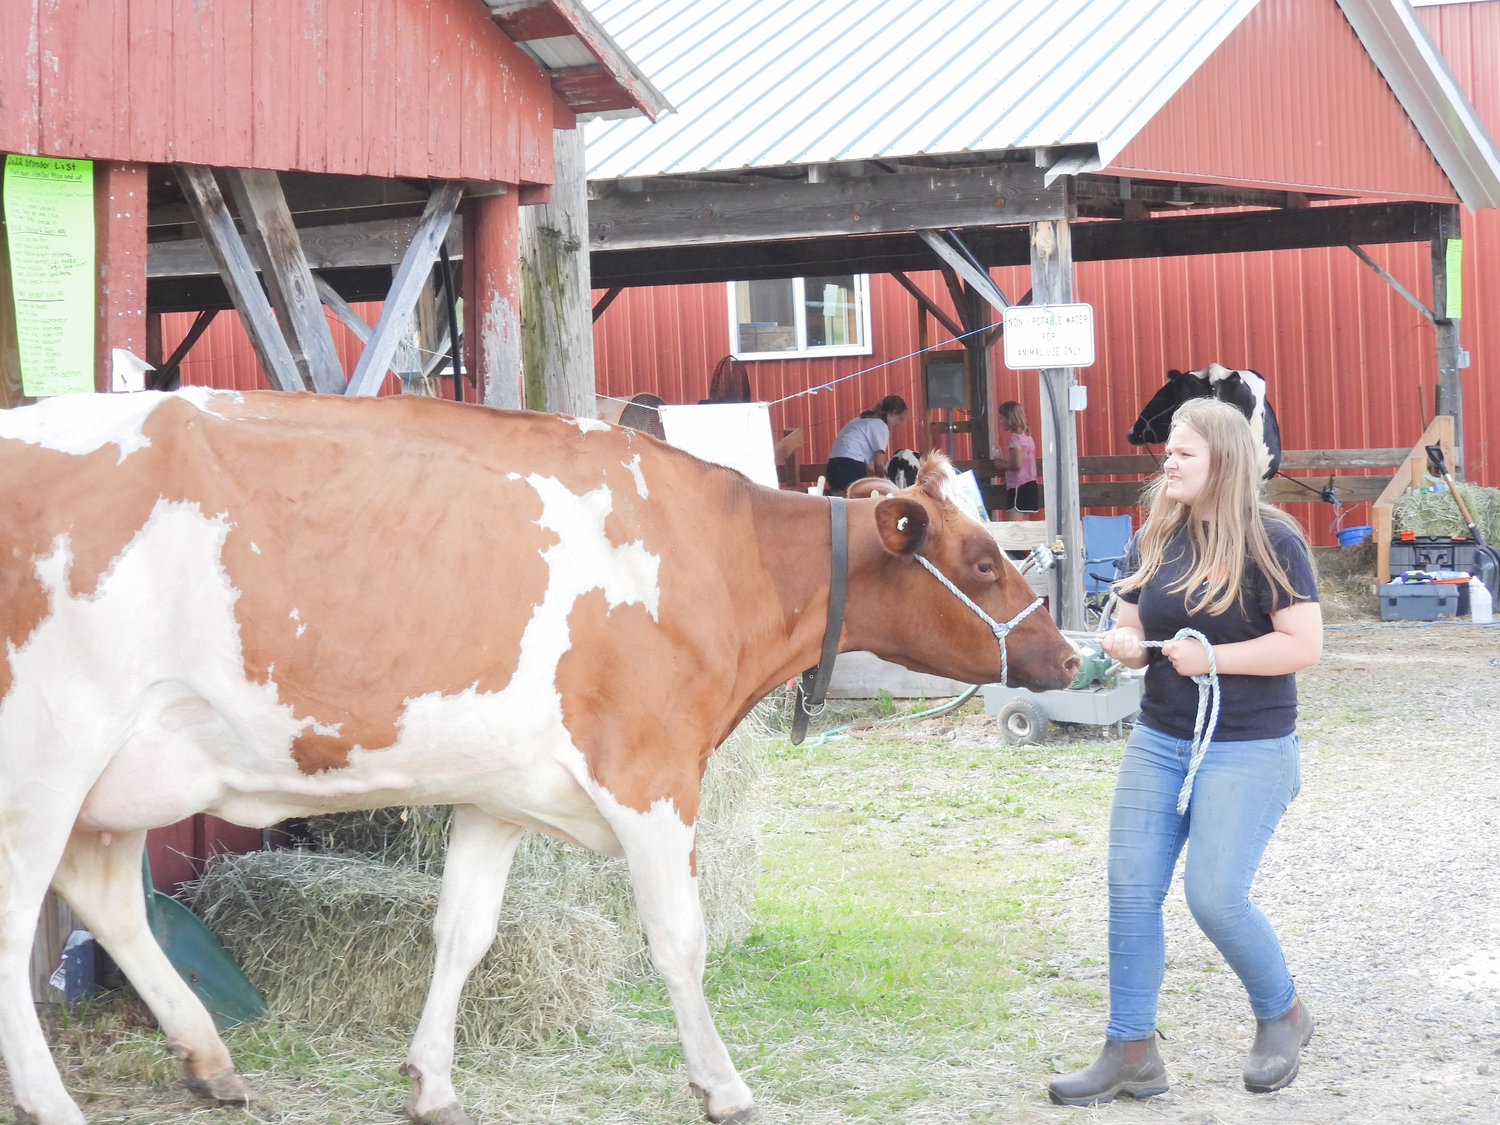 People are now attending the Madison County Fair, trying a number of rides, sampling foods, and seeing what's for sale by local vendors. The Madison County Fair runs until July 10.